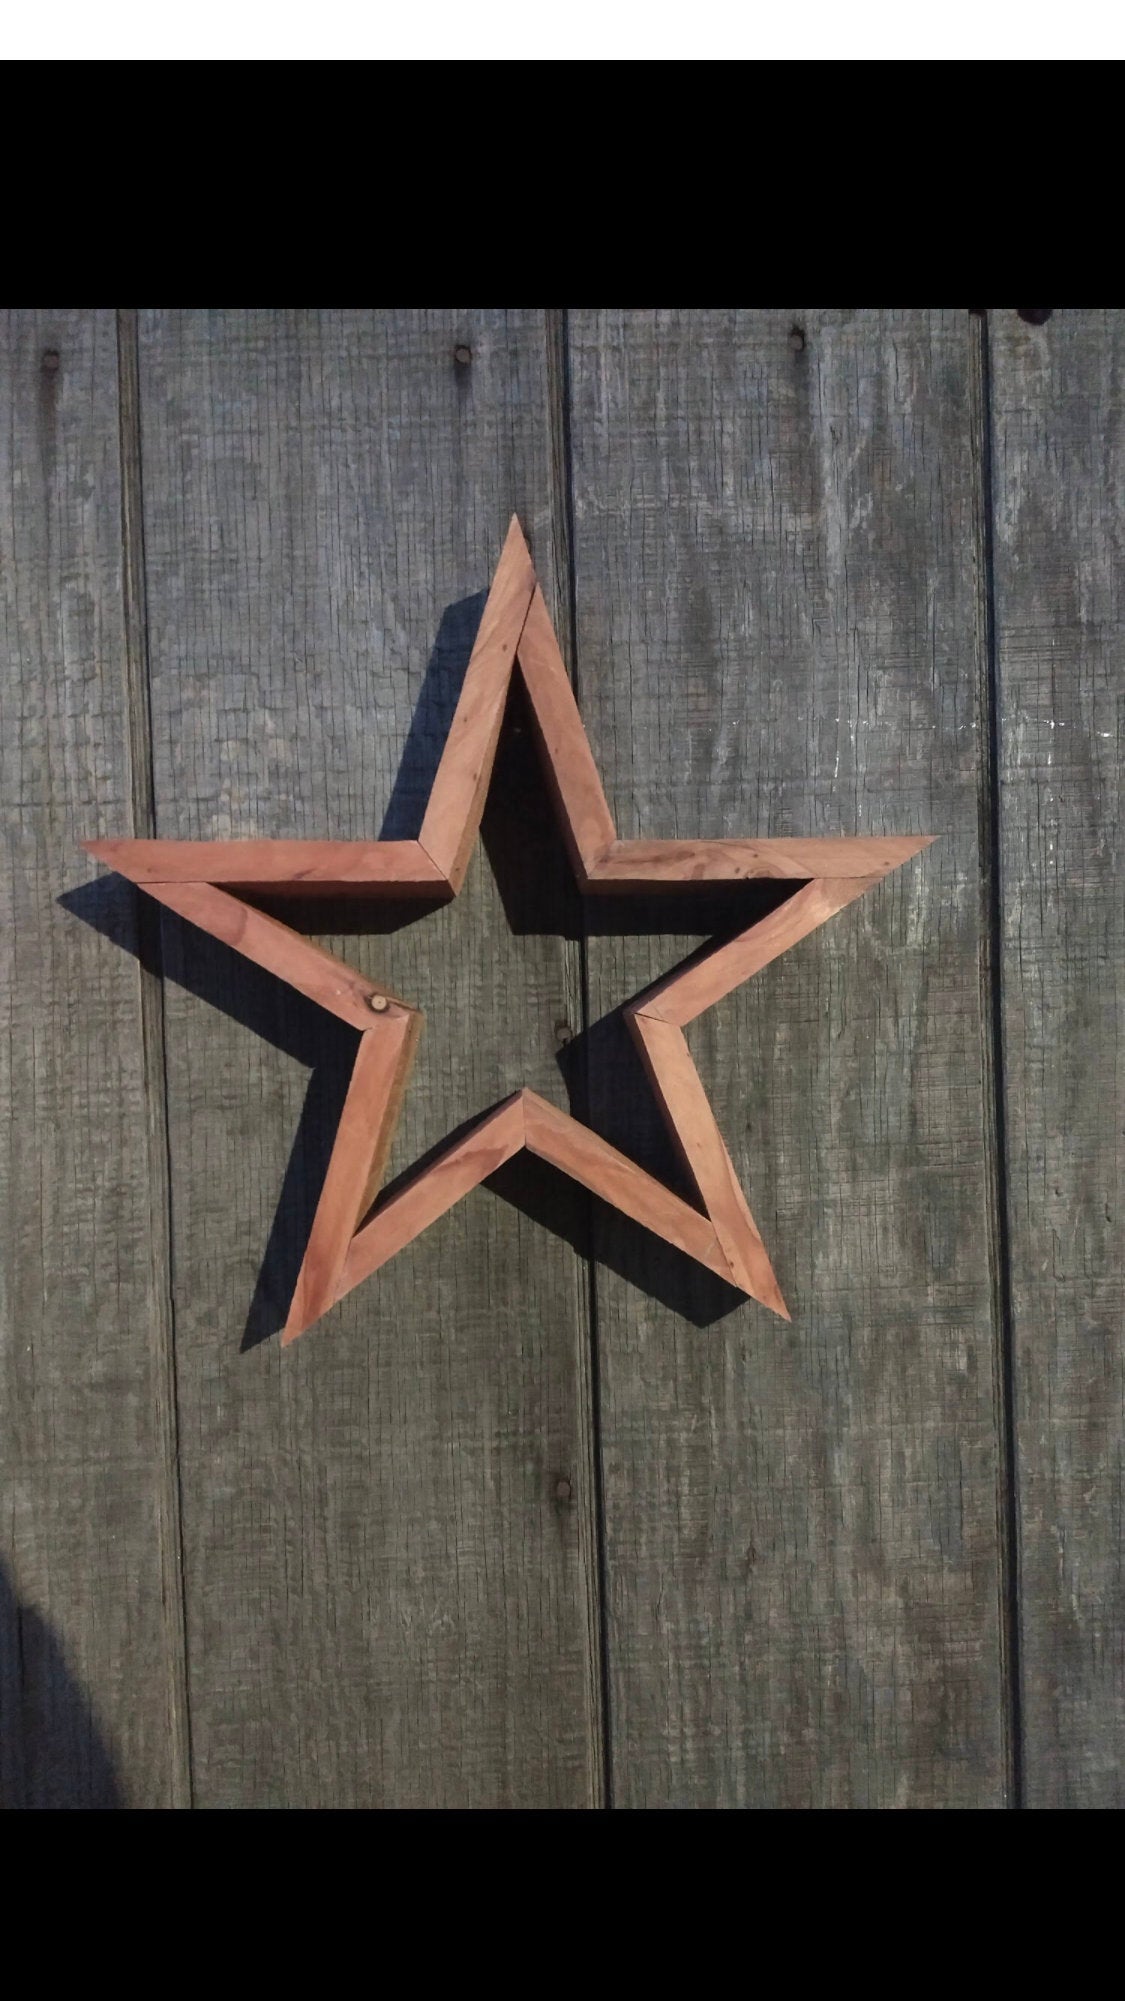 Solid Cedar Wood Succulent hanging star planter/ Fourth of July planter or decor